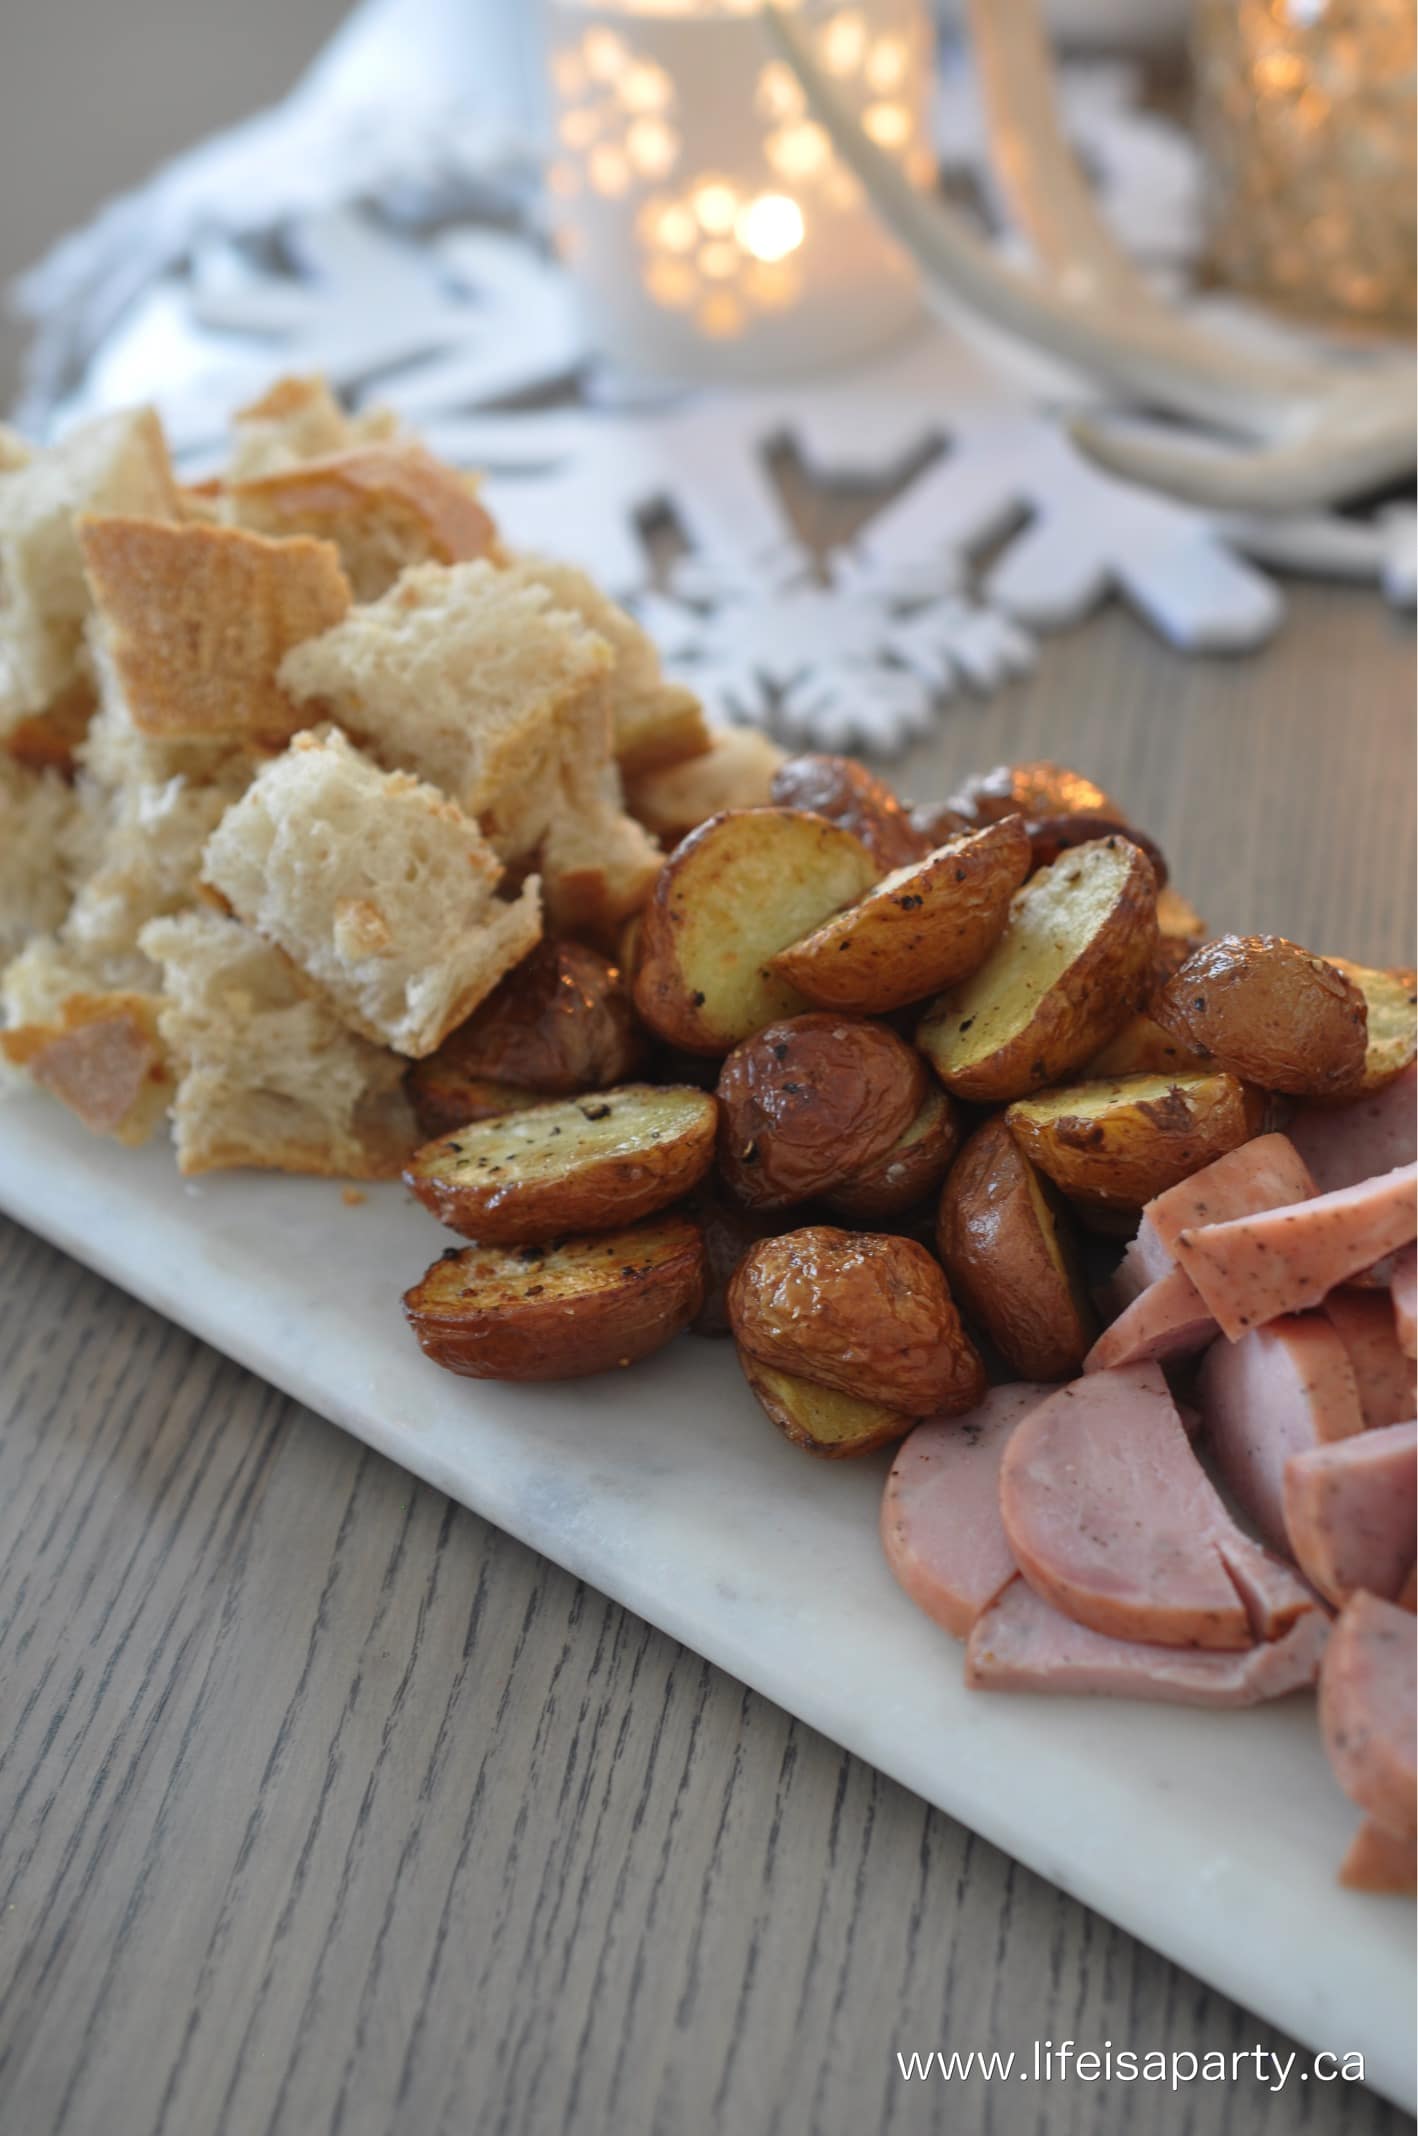 Cheese fondue dippers of bread pieces, roasted potatoes and kielbasa sausage.